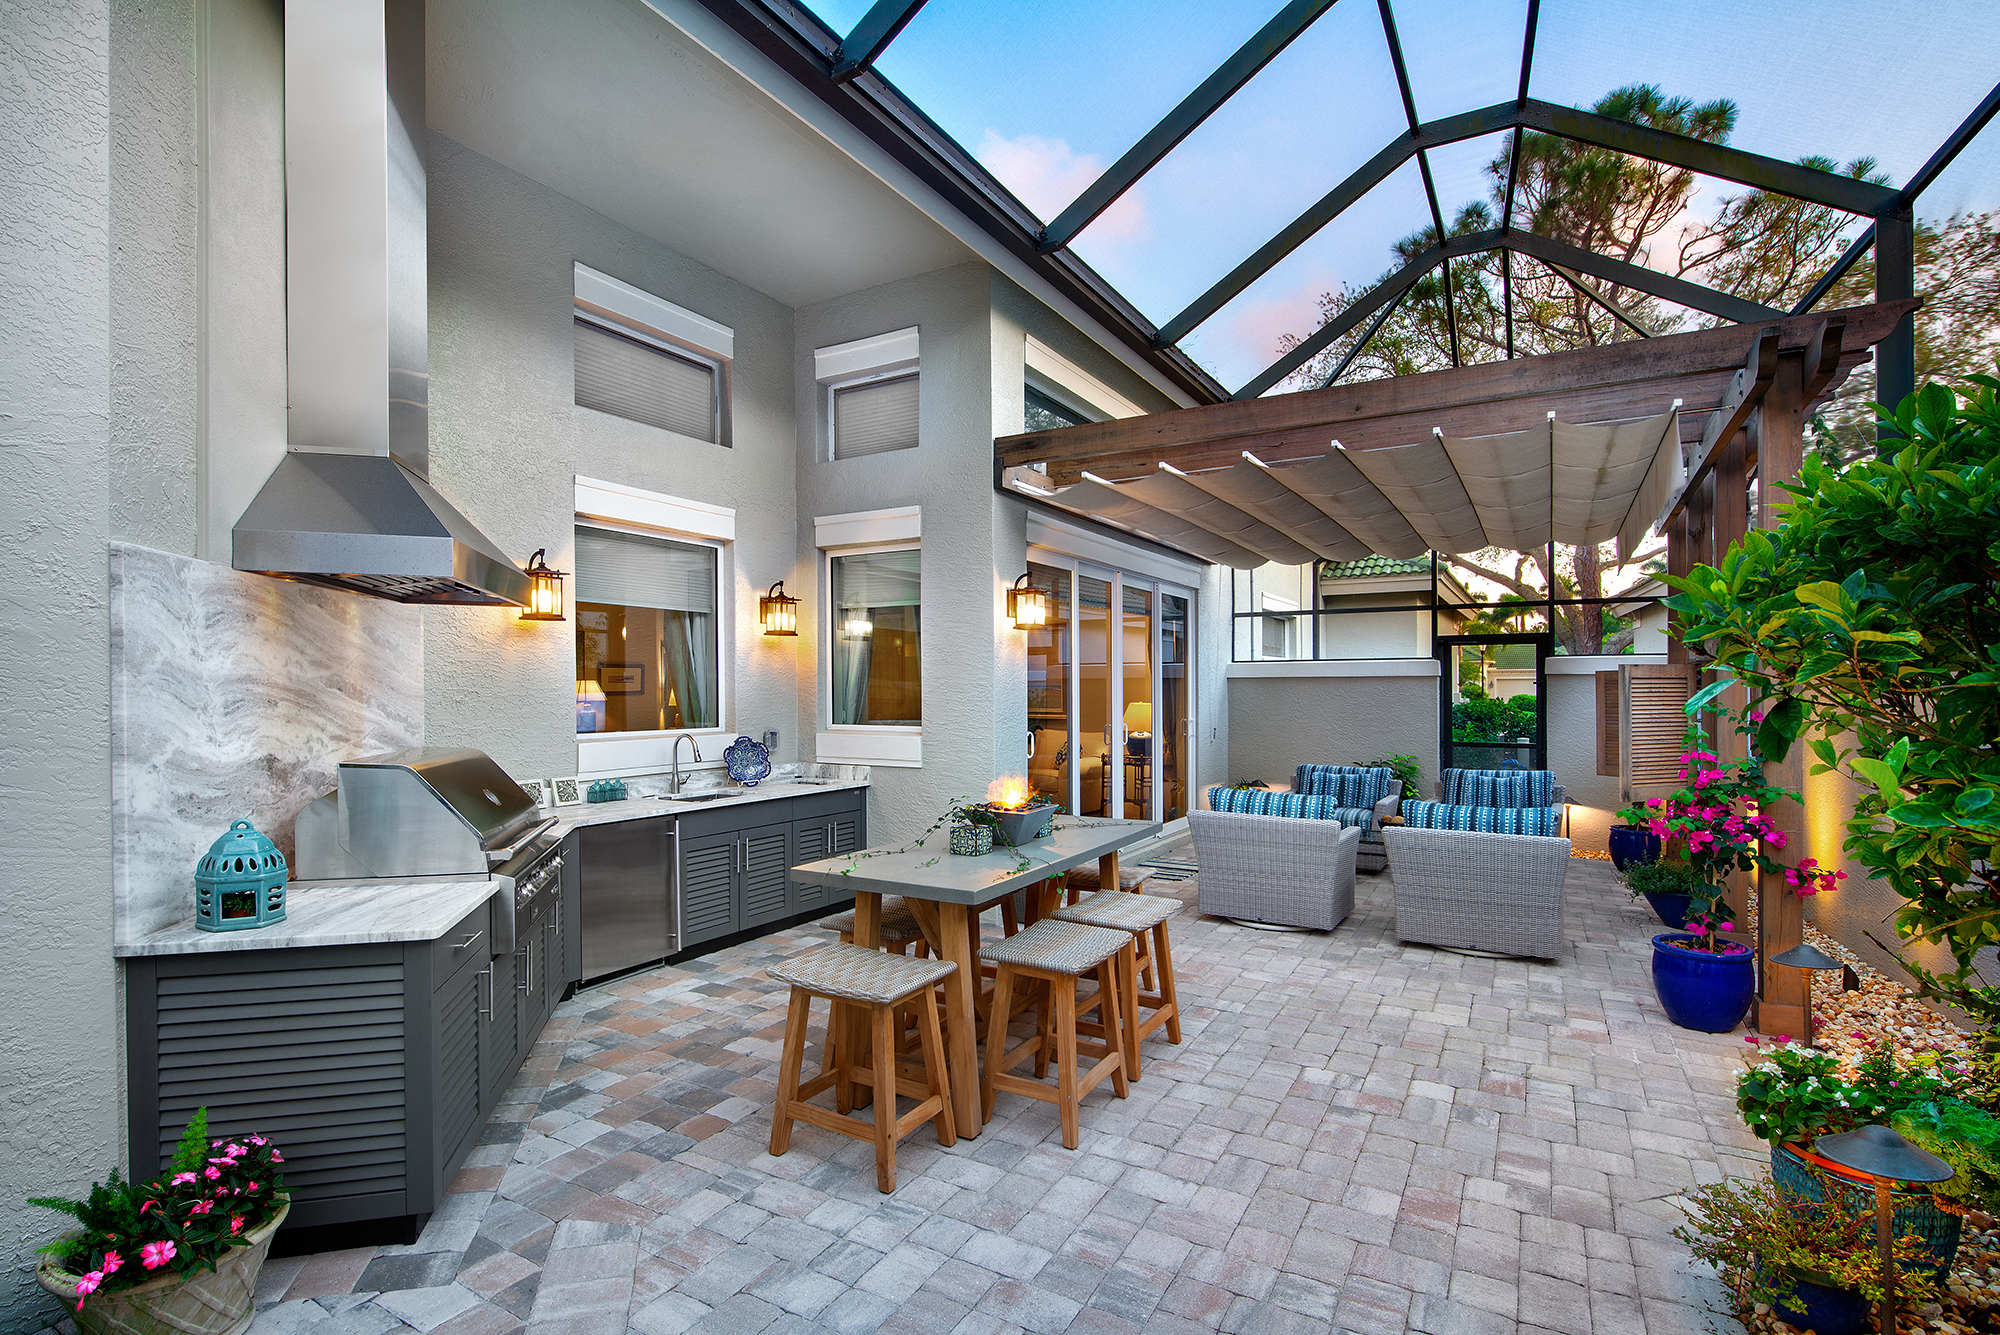 Transform Your Outdoor Space with Backyard Remodeling Services